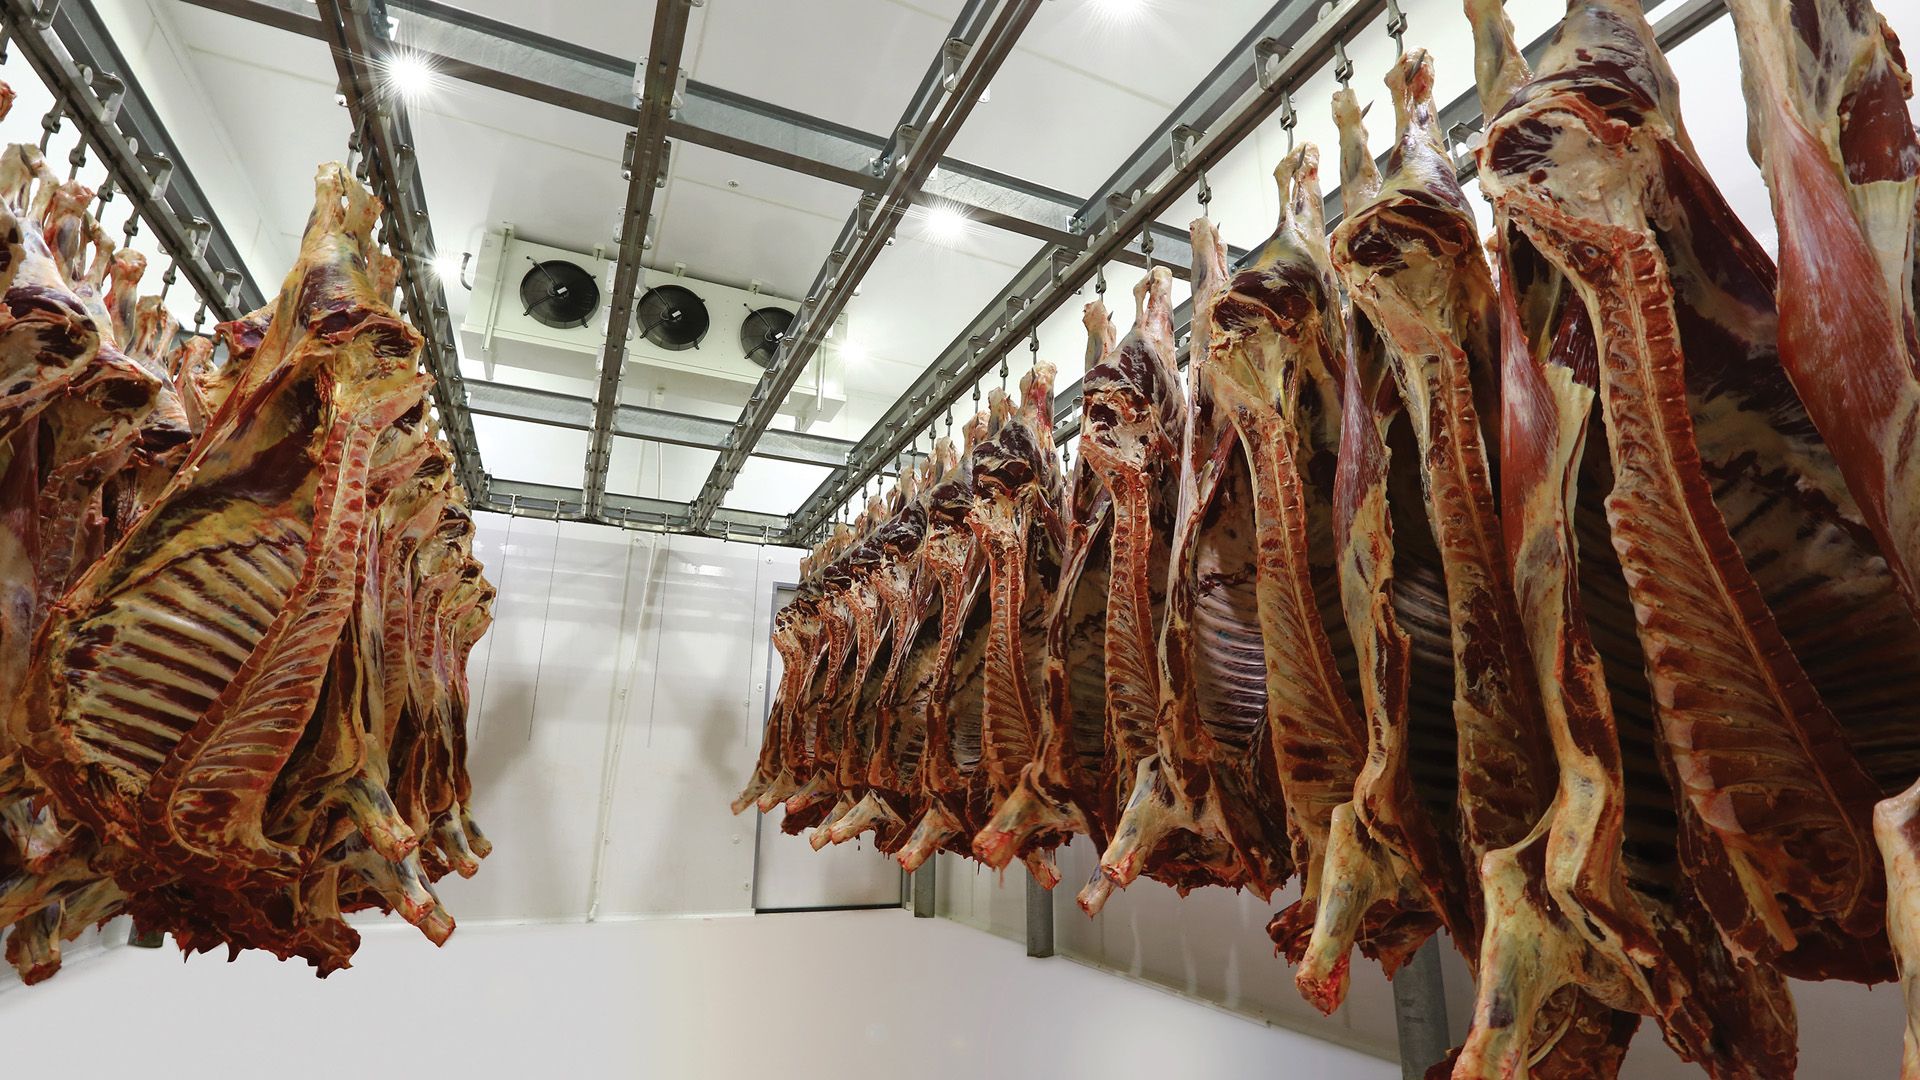 Azerbaijani farmers make miracles in red meat production